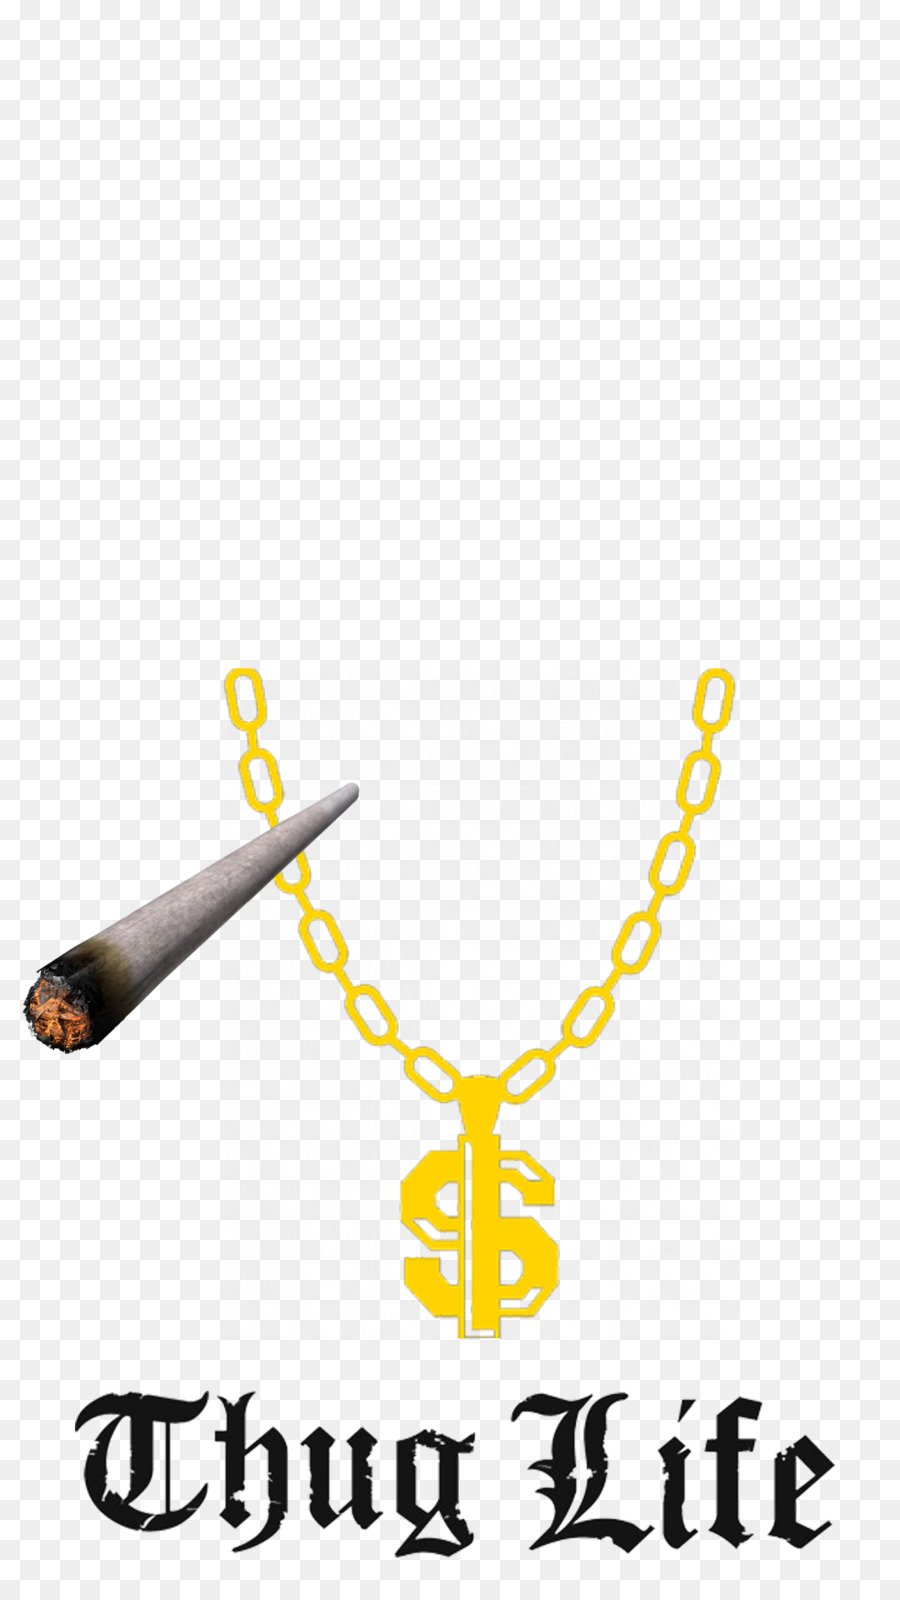 Thug Life Clip art - deal with it png download - 1080*1920 - Free Transparent Thug Life png Download.